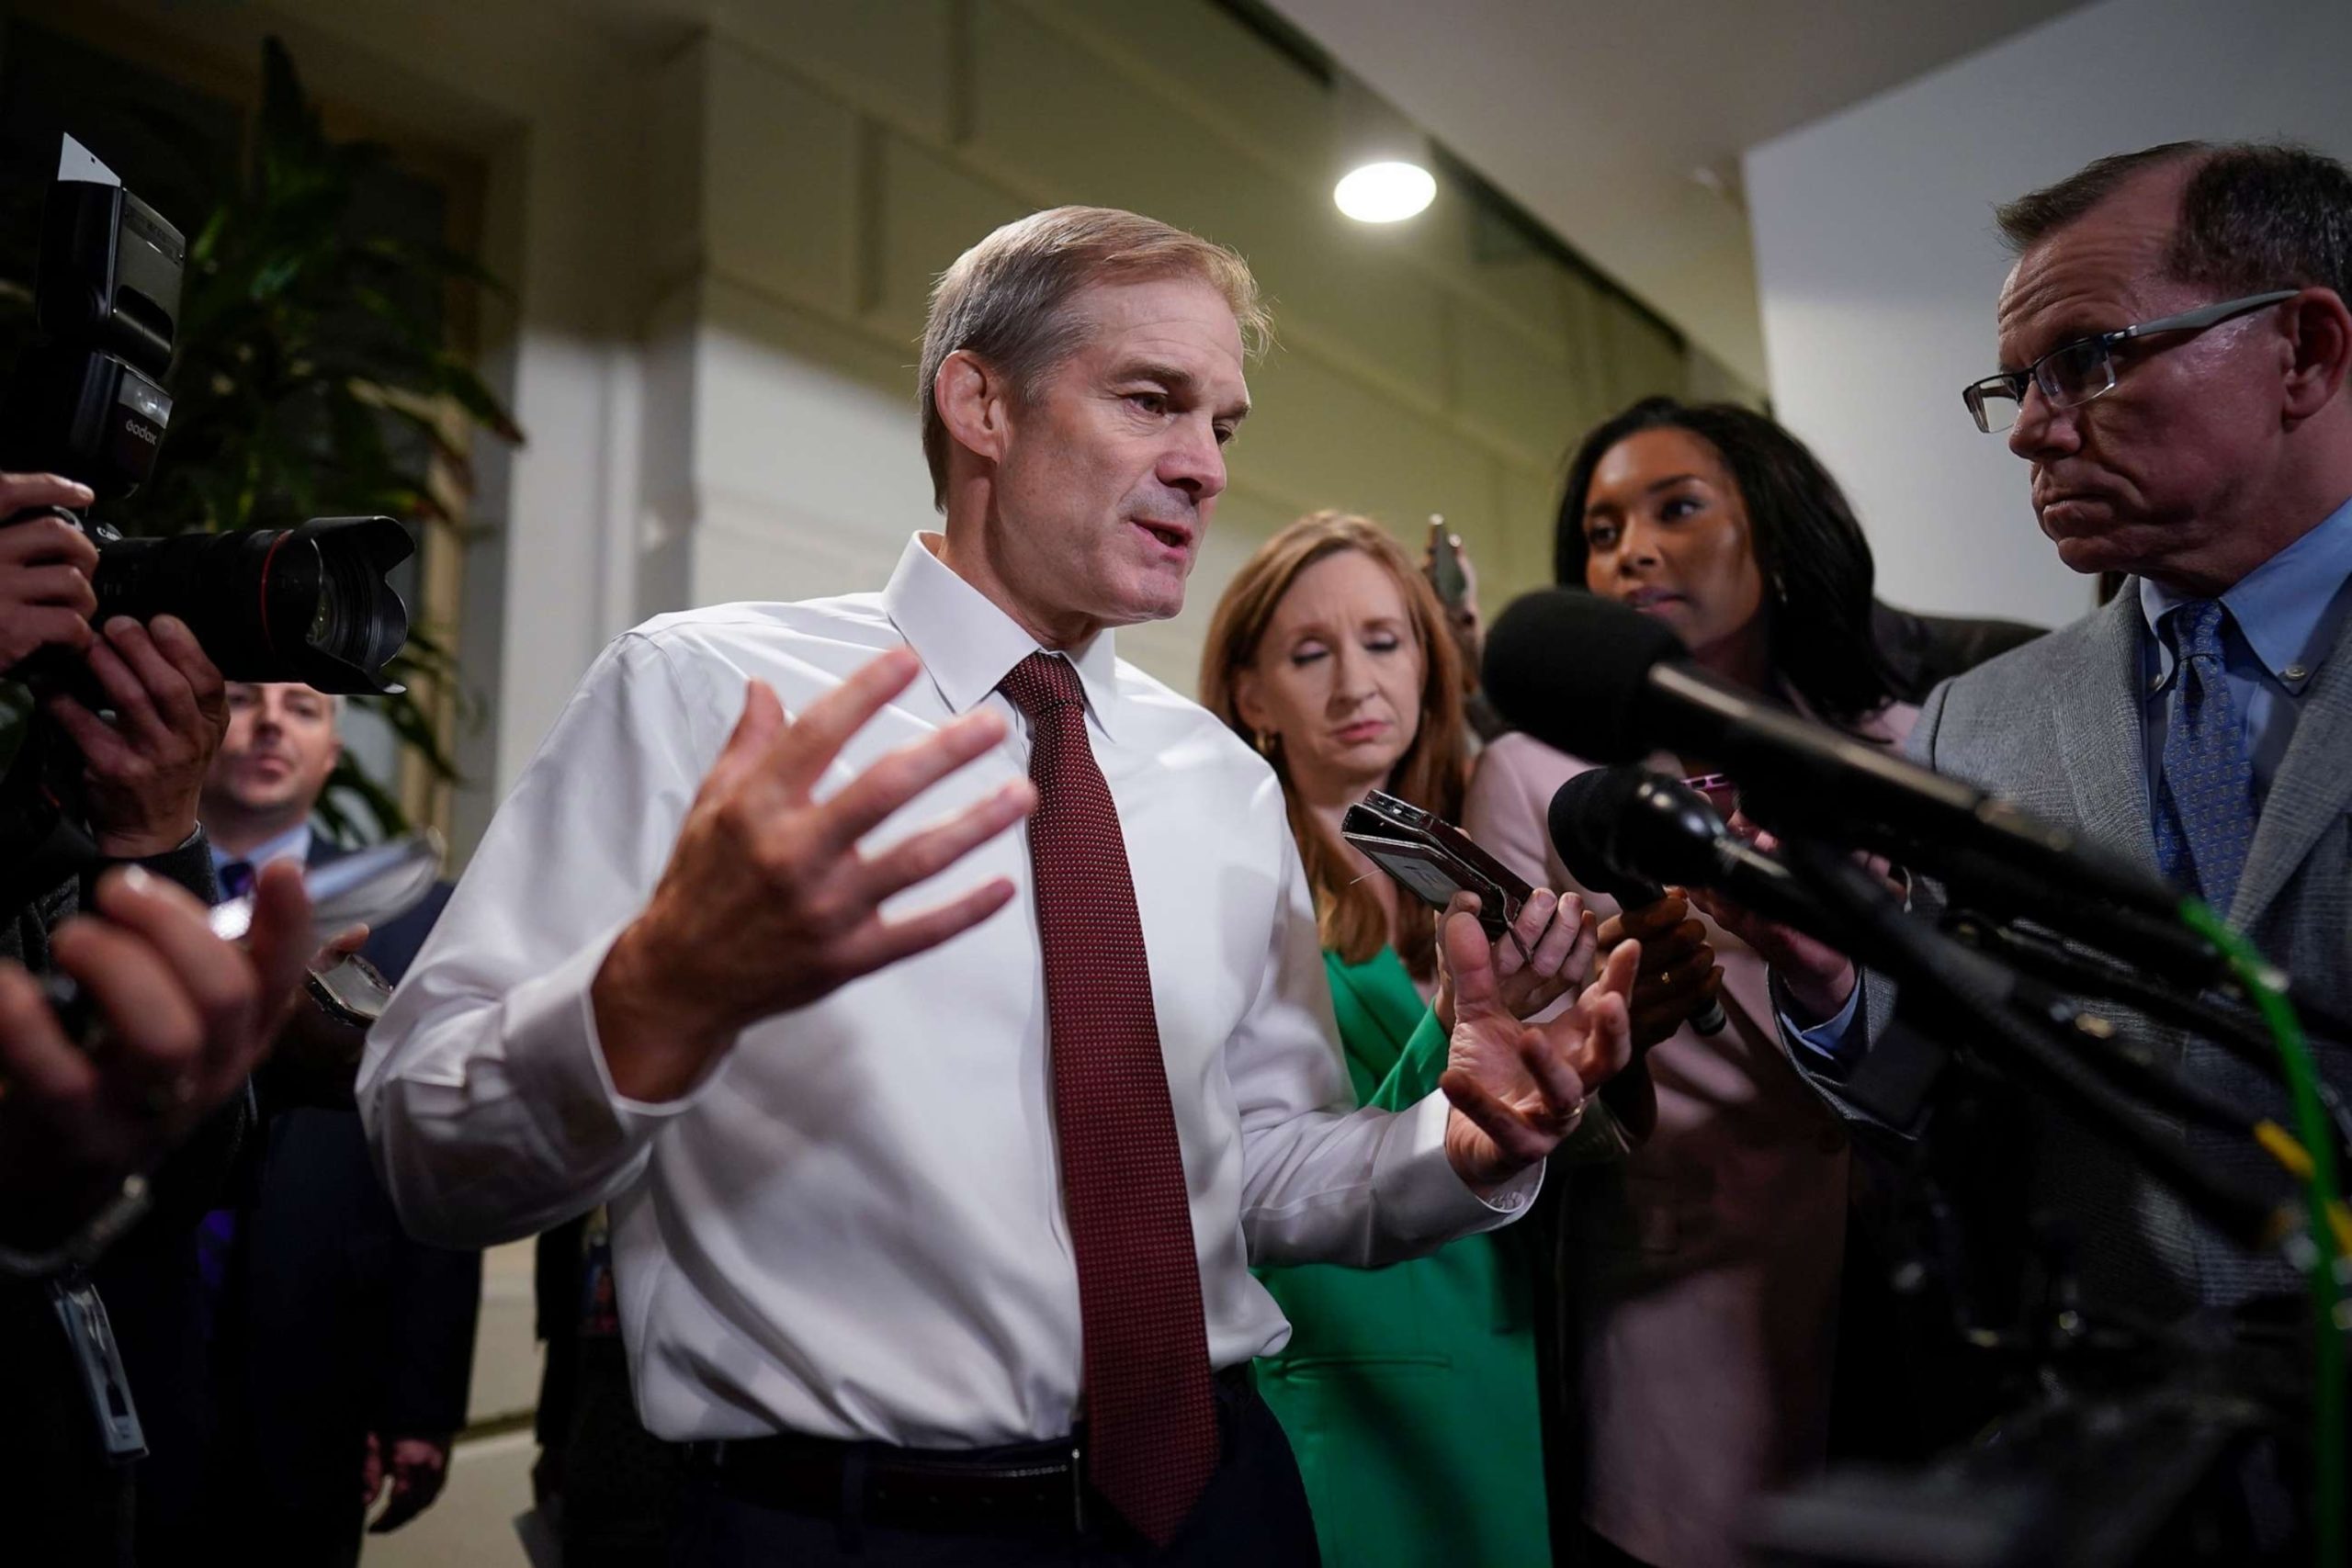 Moderates within the Republican Party are blocking Republican Jim Jordan's House speaker bid - here's why